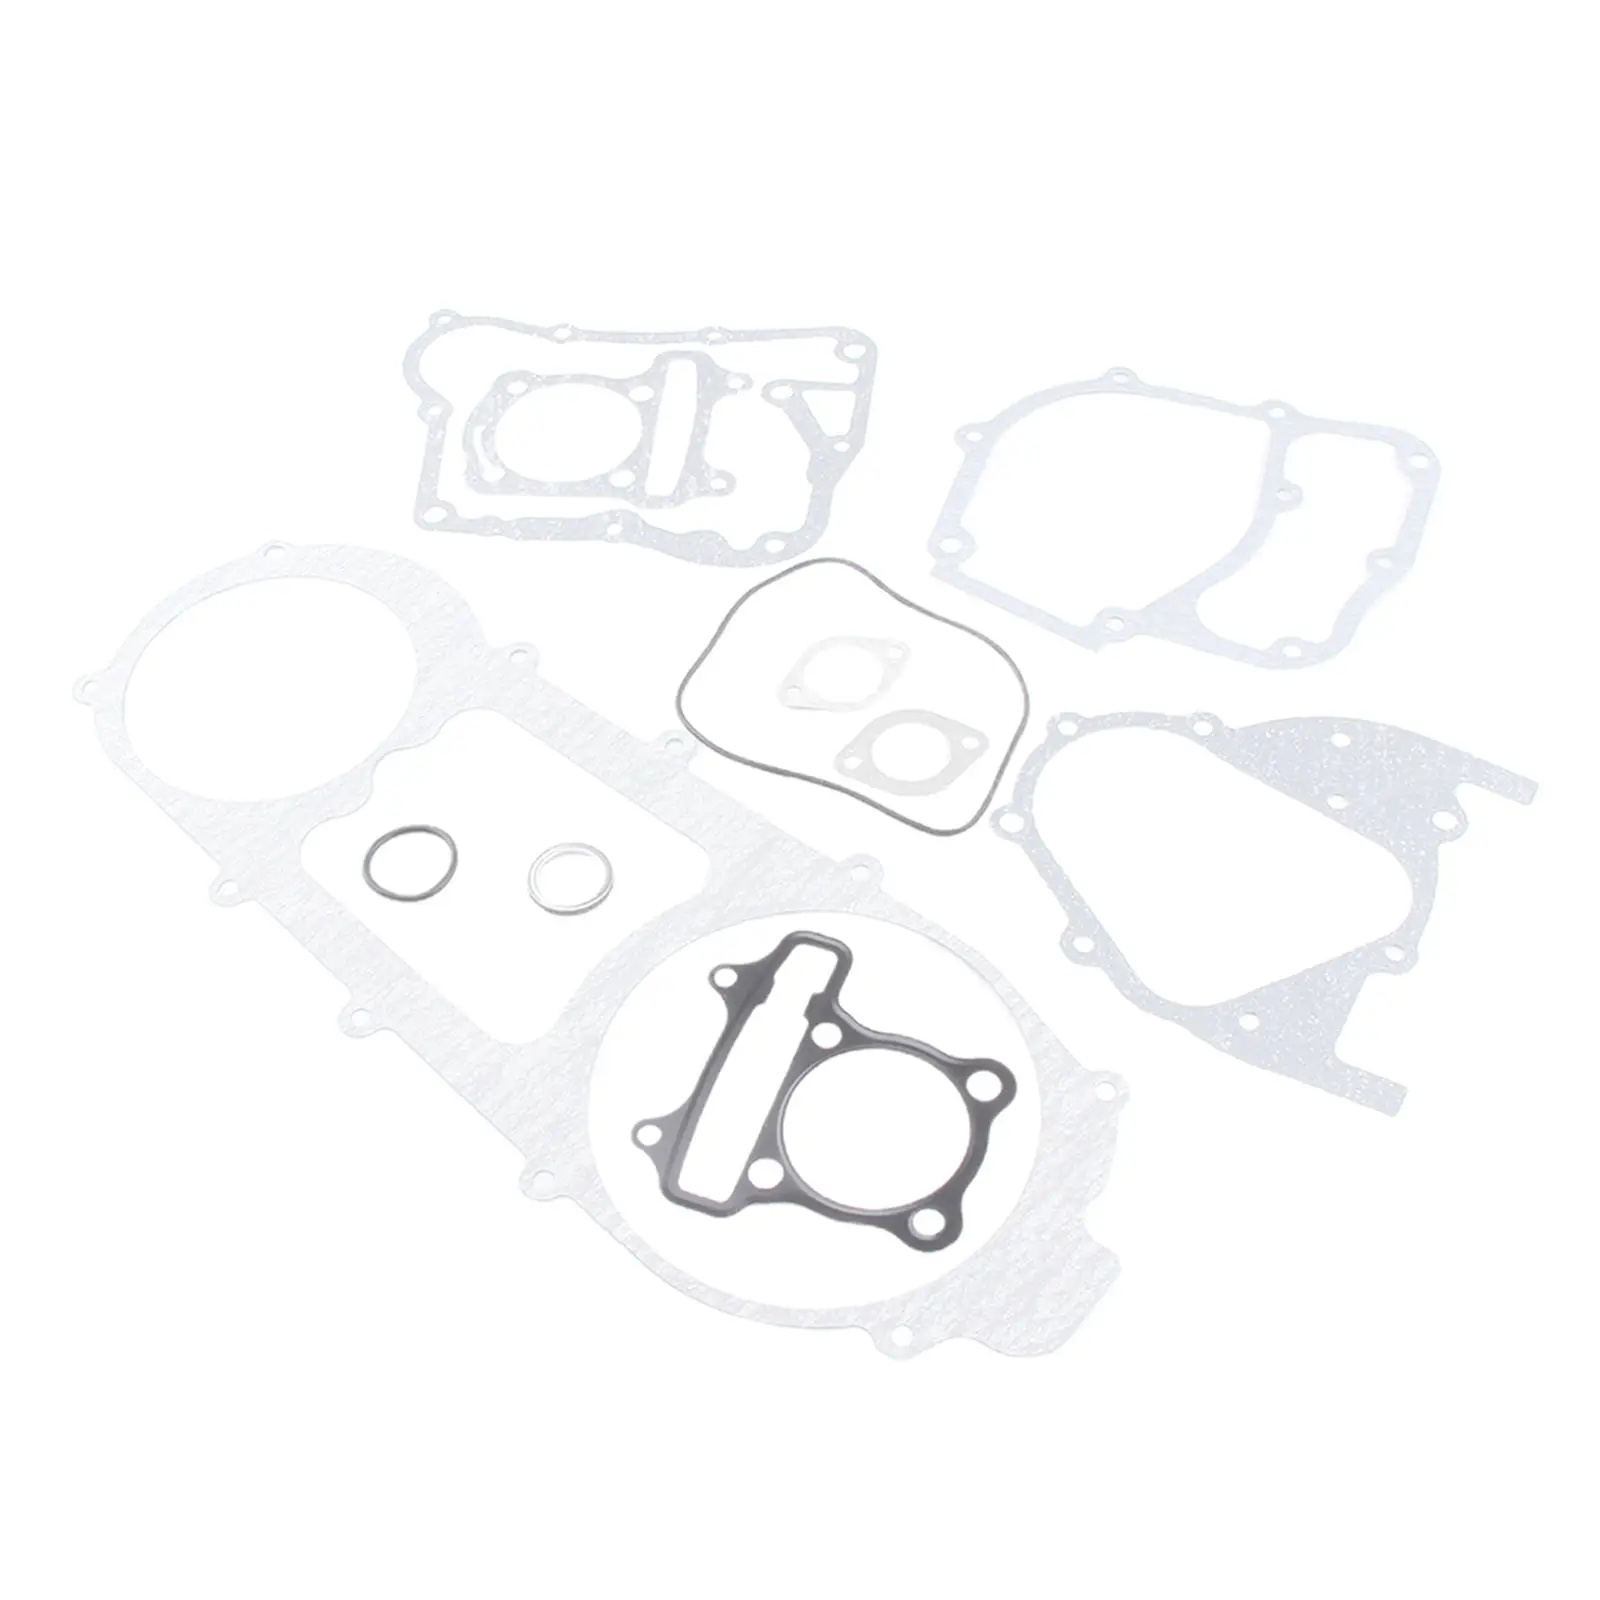 Complete Engine Head Gasket Kit Set for GY6 150cc Moped Scooters ATVs Go Karts